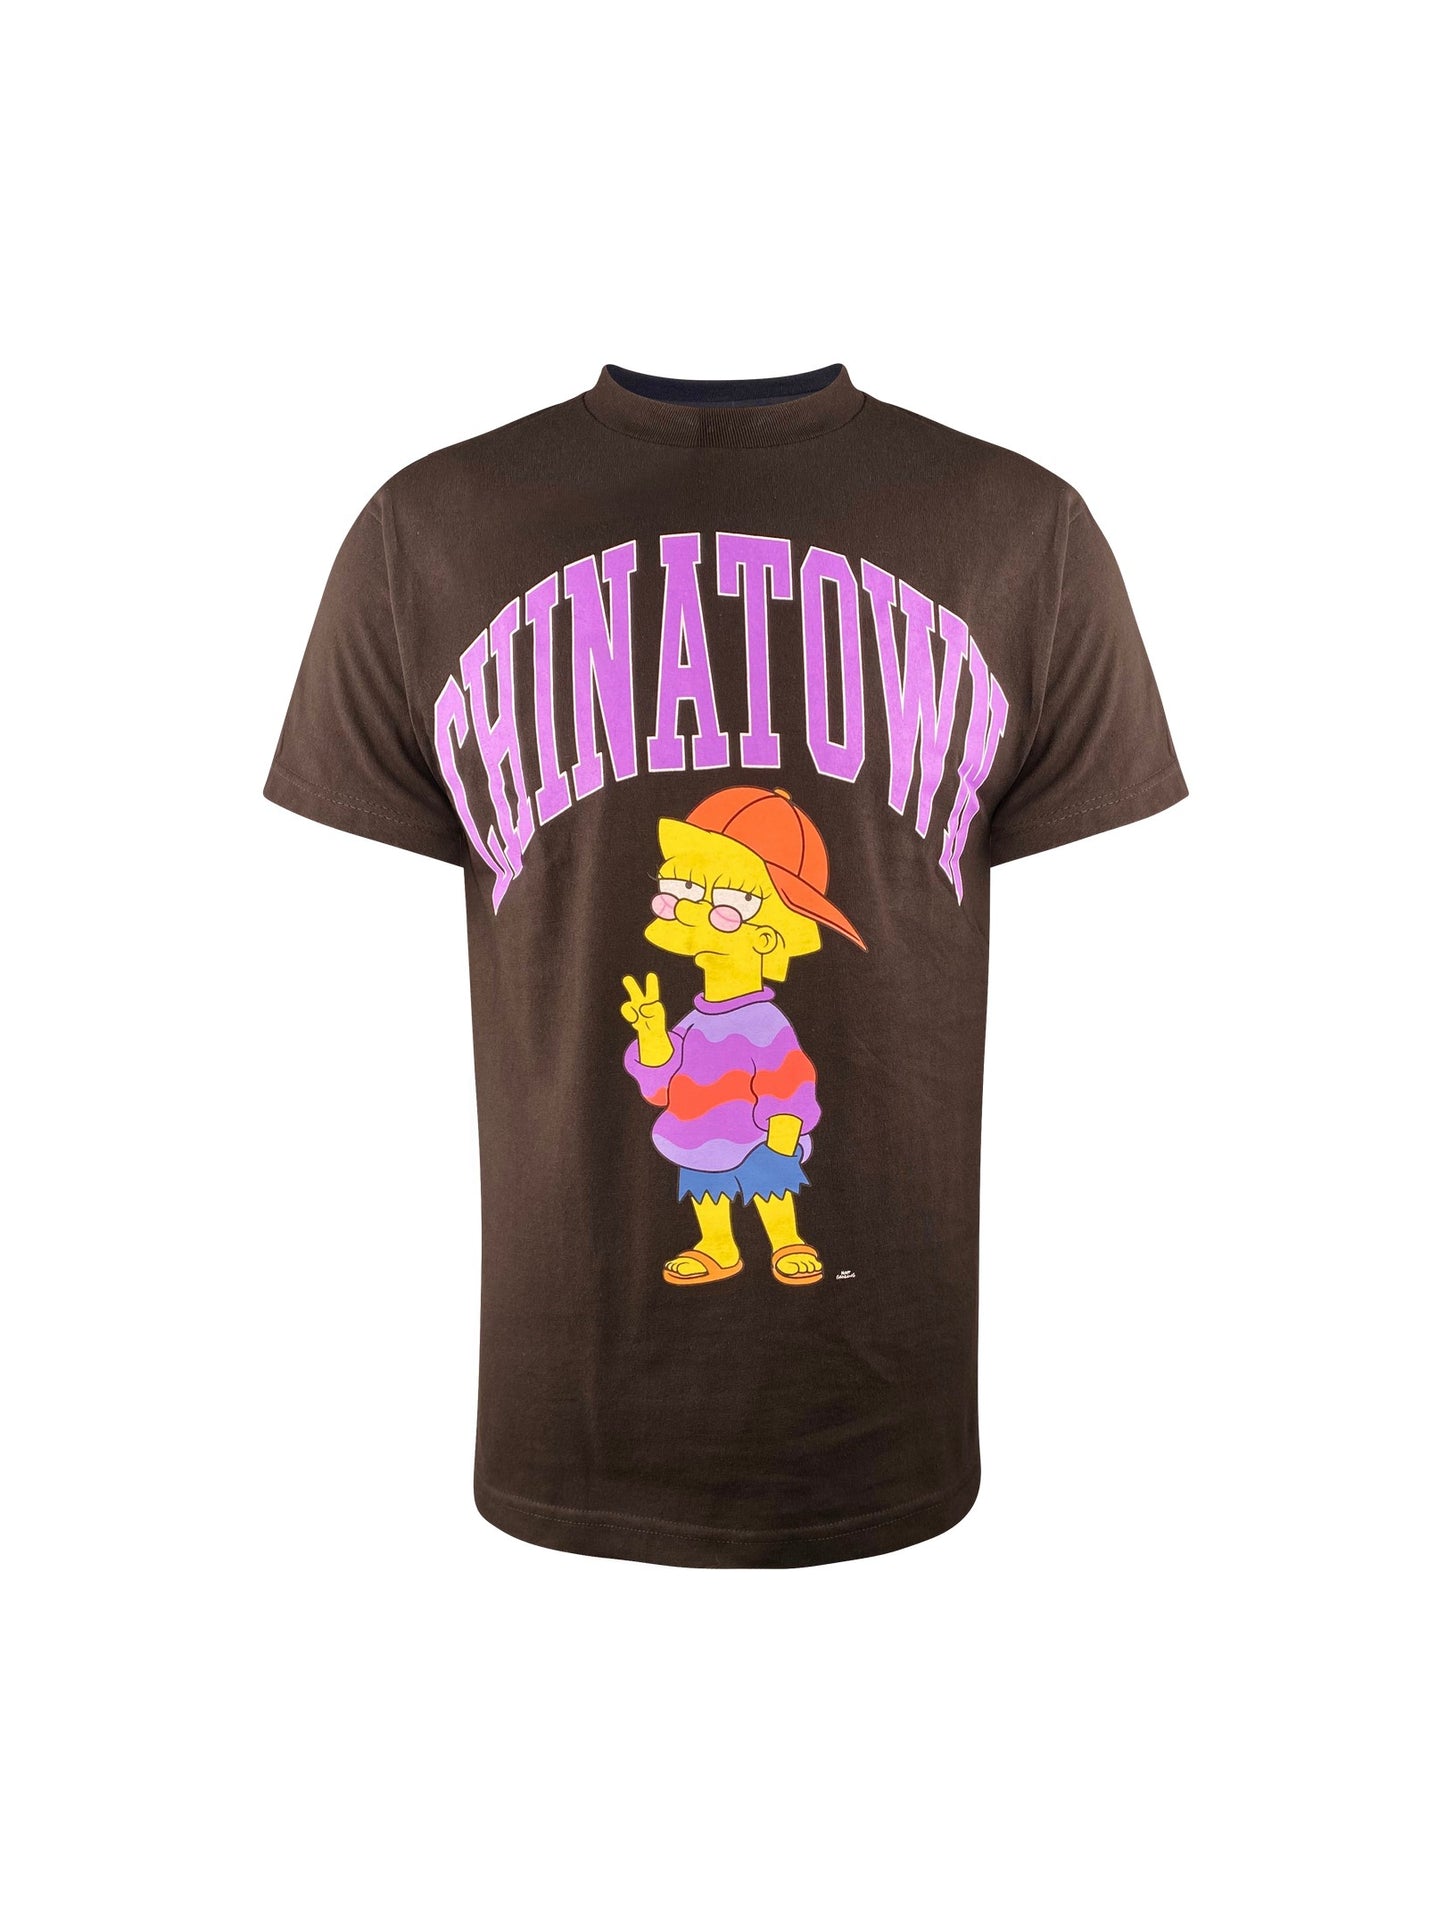 Chinatown Market T-Shirt “Market x The Simpsons Like You Know Whatever Arc ” -black